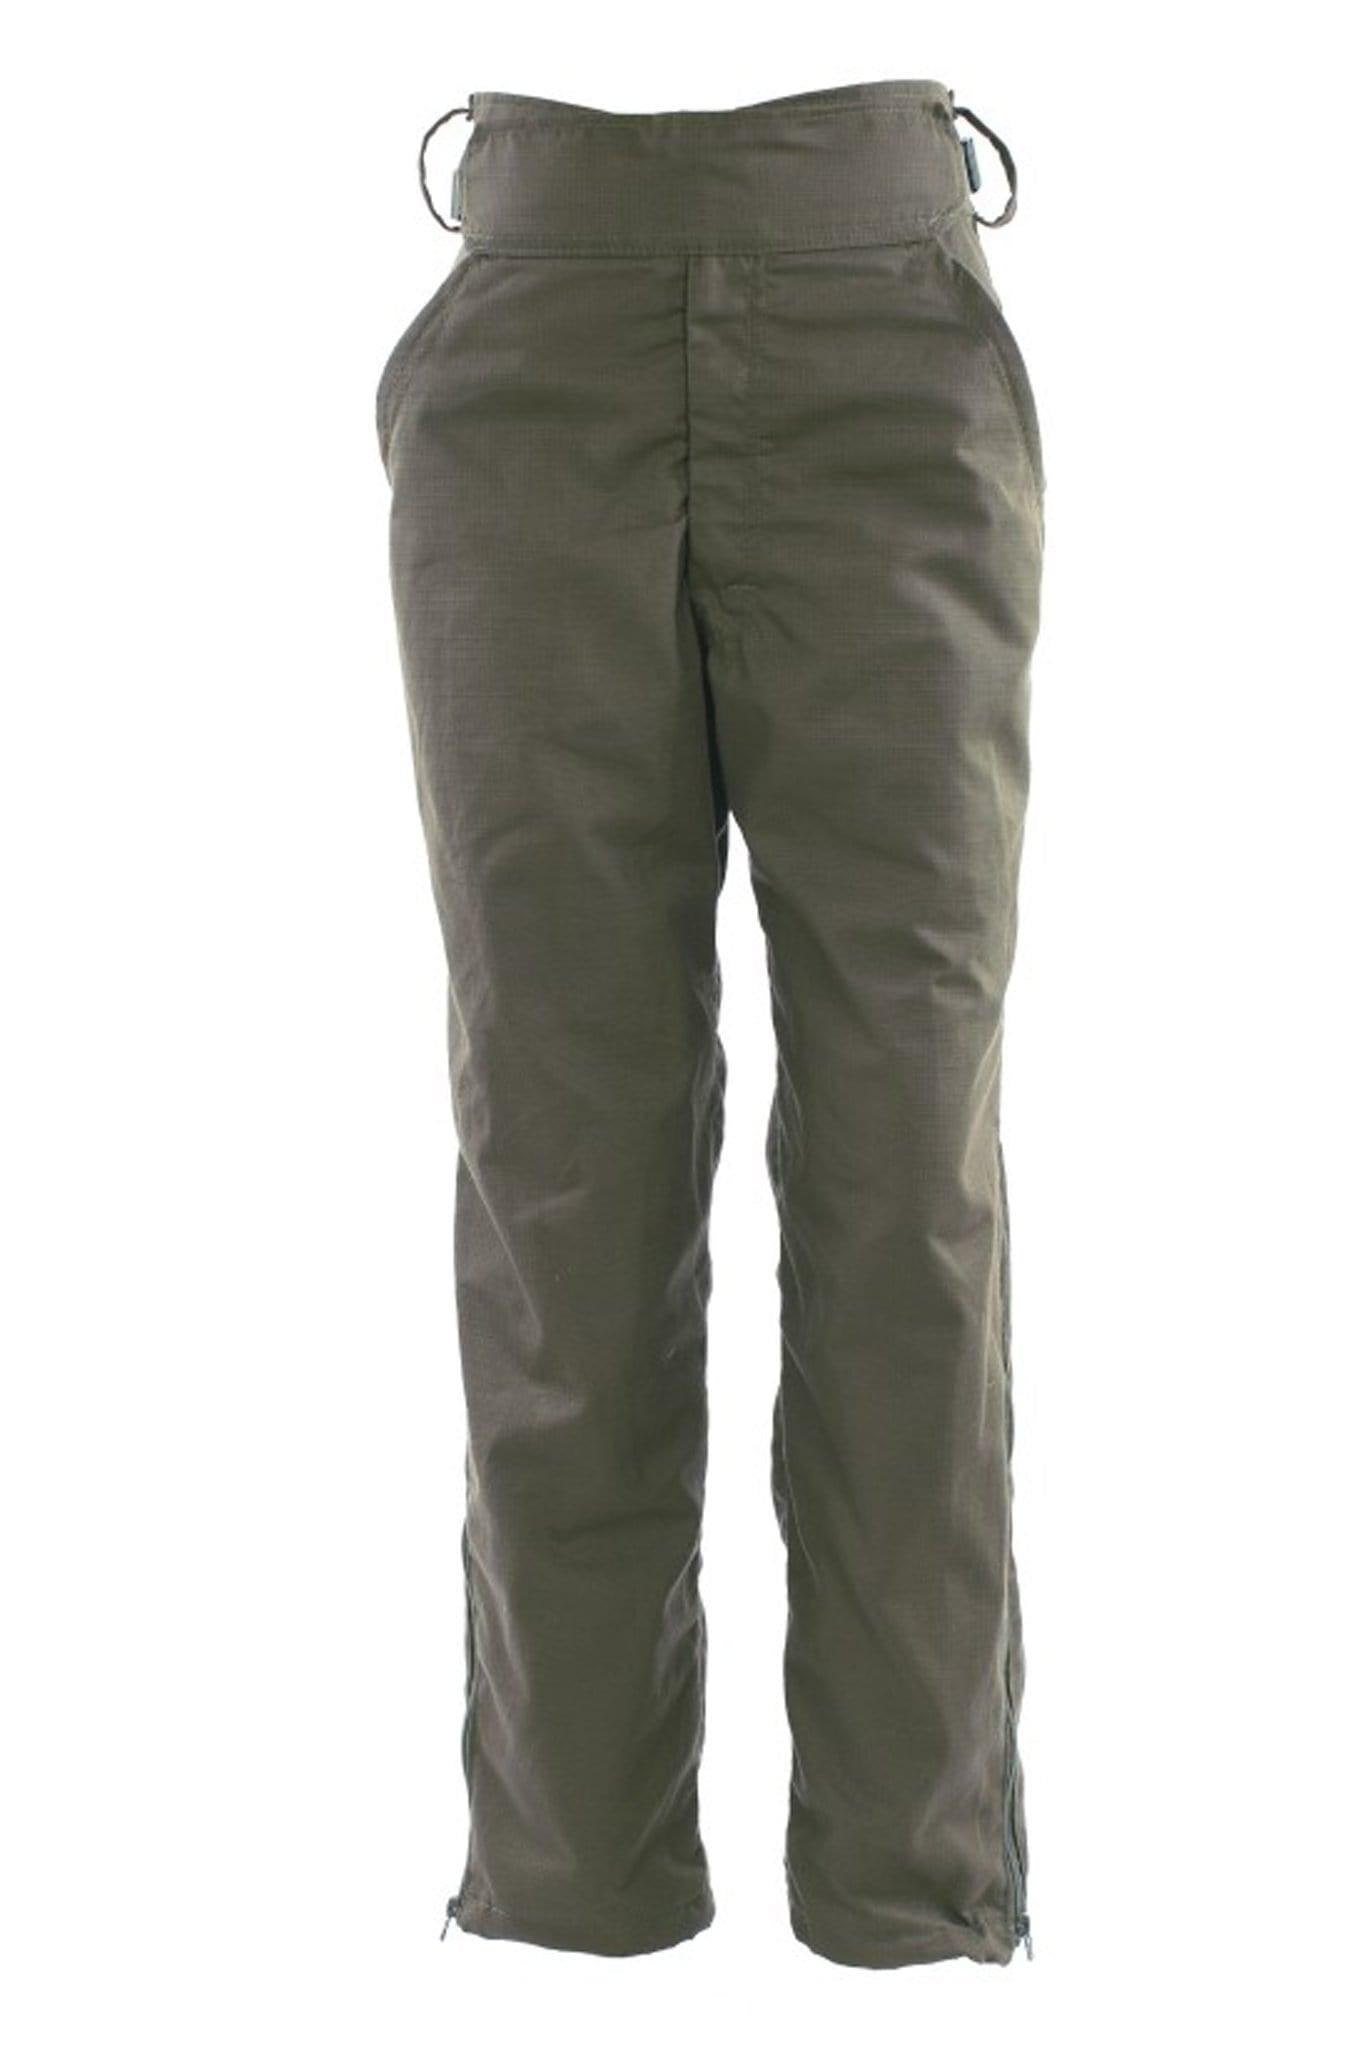 Fortis Trousers Fortis Ladies Falkland Waterproof Over Trousers